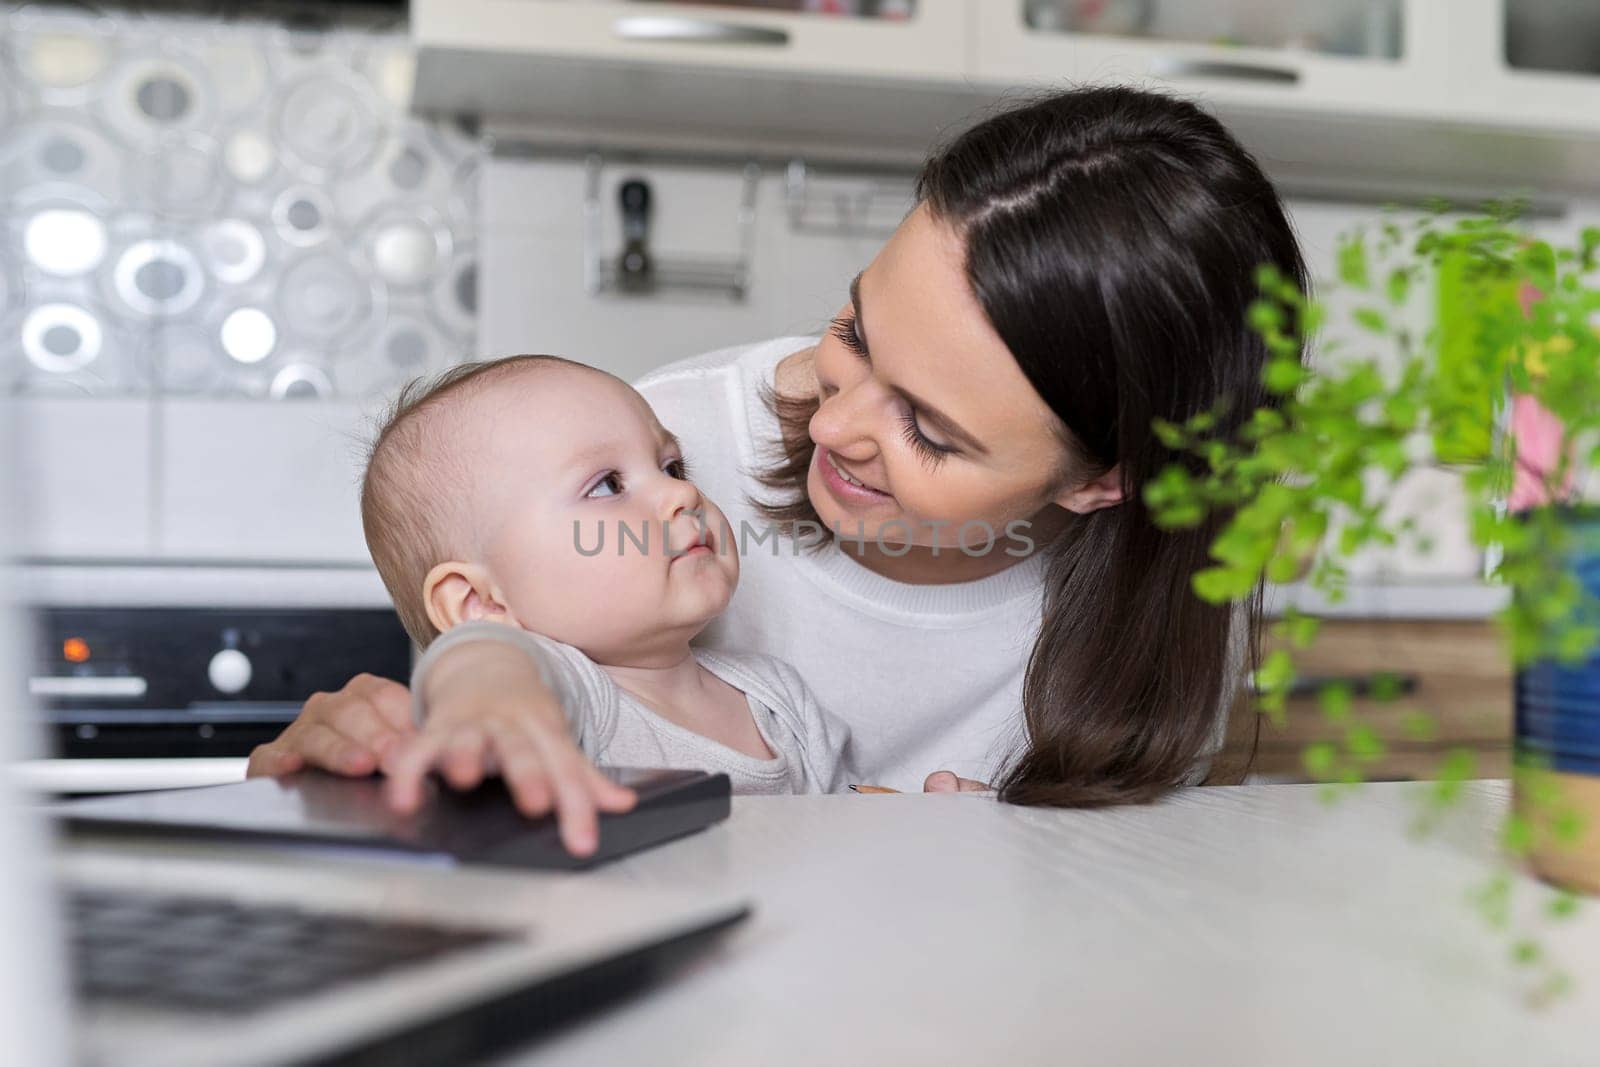 Portrait of mom and baby son sitting at home in kitchen looking in laptop screen. Working at home, blogging, vlog, business, rest and leisure, e-learning for young mother, online shopping